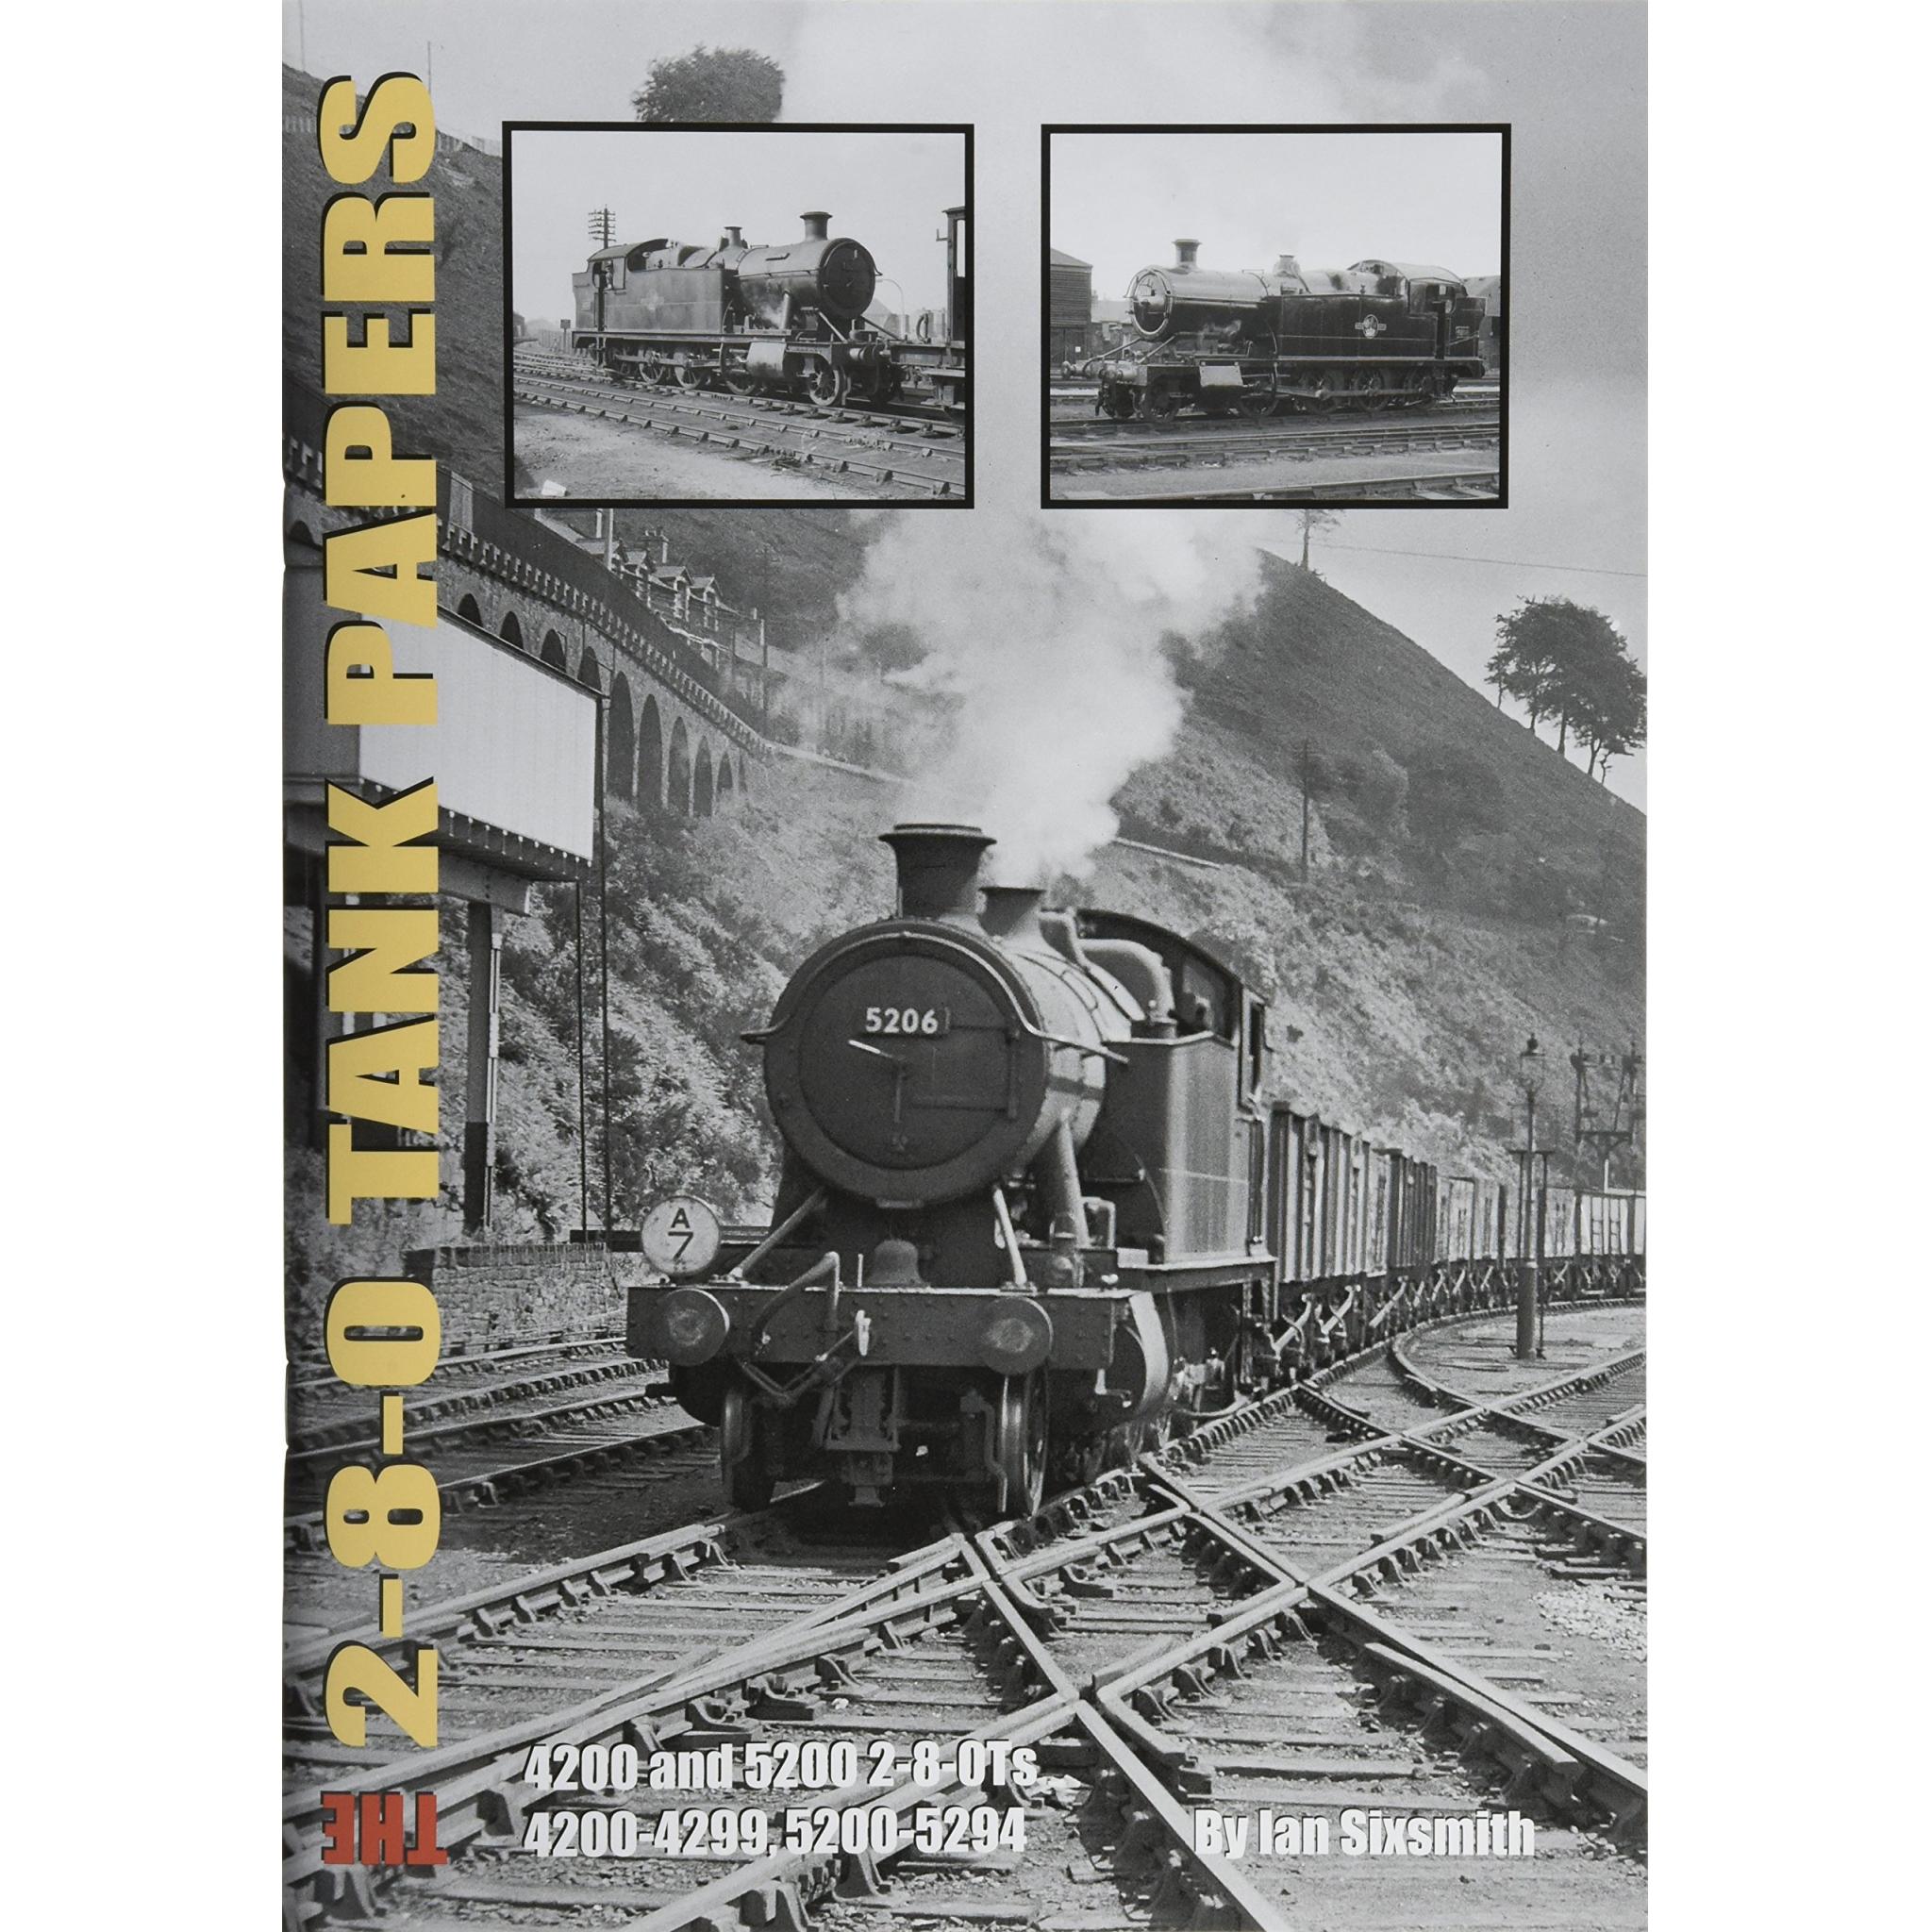 The 2-8-0 TANK PAPERS 4200, 5200 2-8-0Ts, 4200-5294